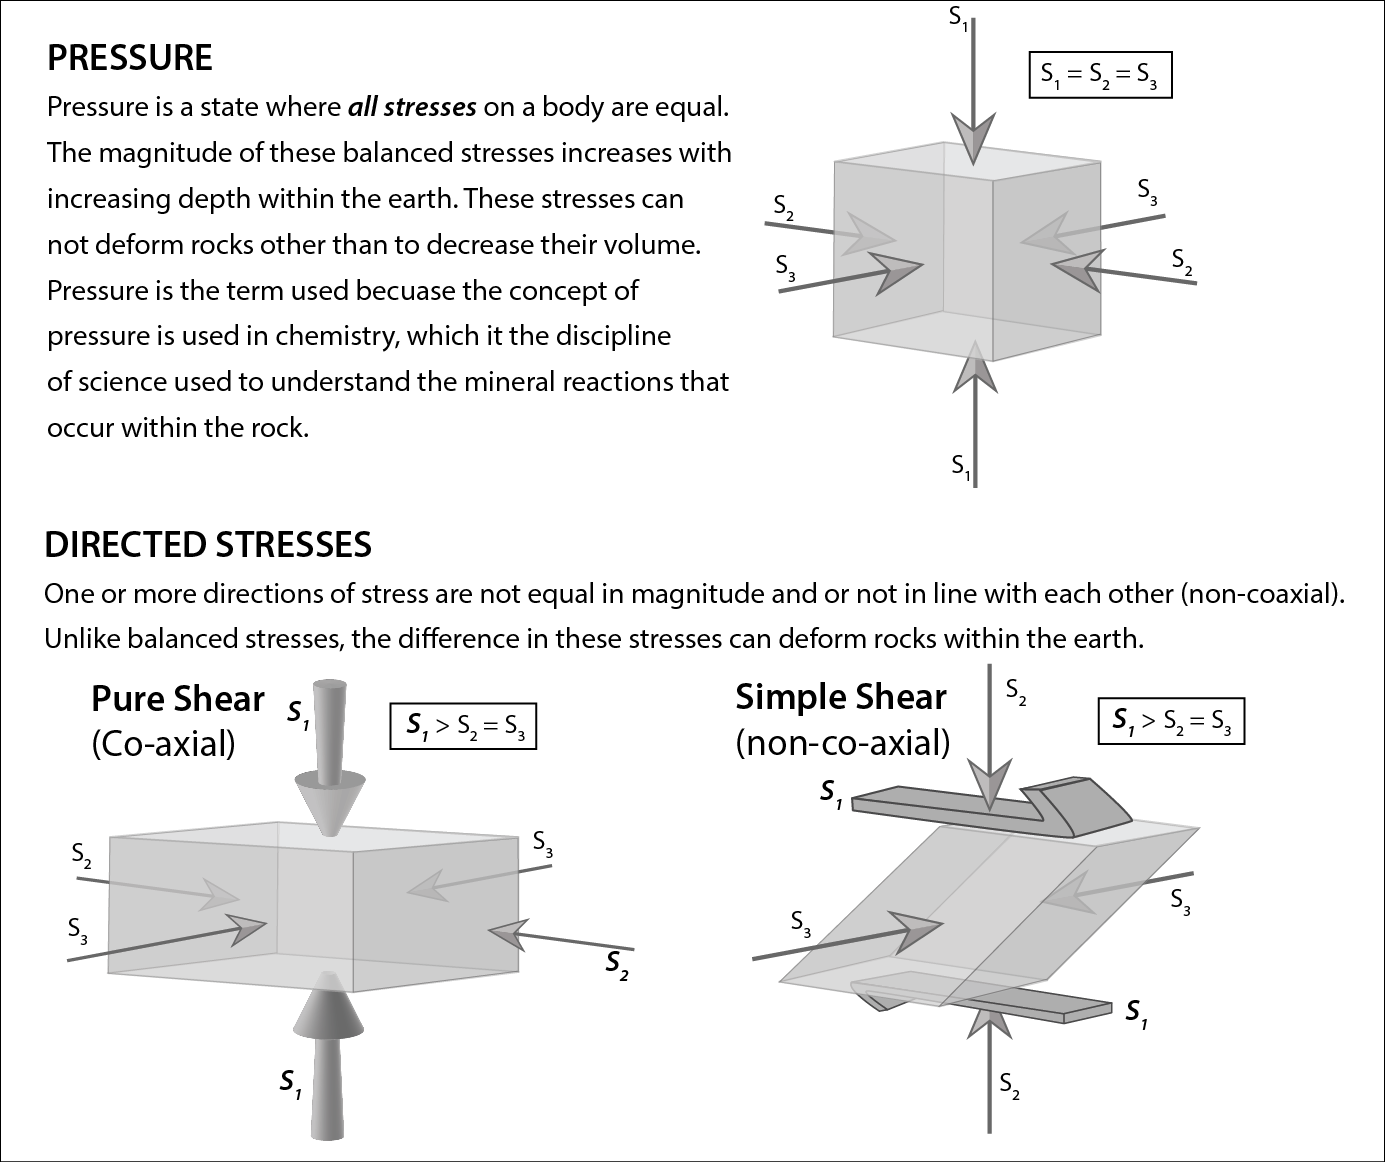 Pressure is a state where all stresses on a body are equal. The magnitude of these balanced stresses increases with increasing depth within the earth. These stresses can not deform rocks other than to decrease their volume. Pressure is the term used becuase the concept of pressure is used in chemistry, which it the discipline of science used to understand the mineral reactions that occur within the rock. DIRECTED STRESSES s, s, One or more directions of stress are not equal in magnitude and or not in line with each other (non-coaxial). Unlike balanced stresses, the difference in these stresses can deform rocks within the earth.